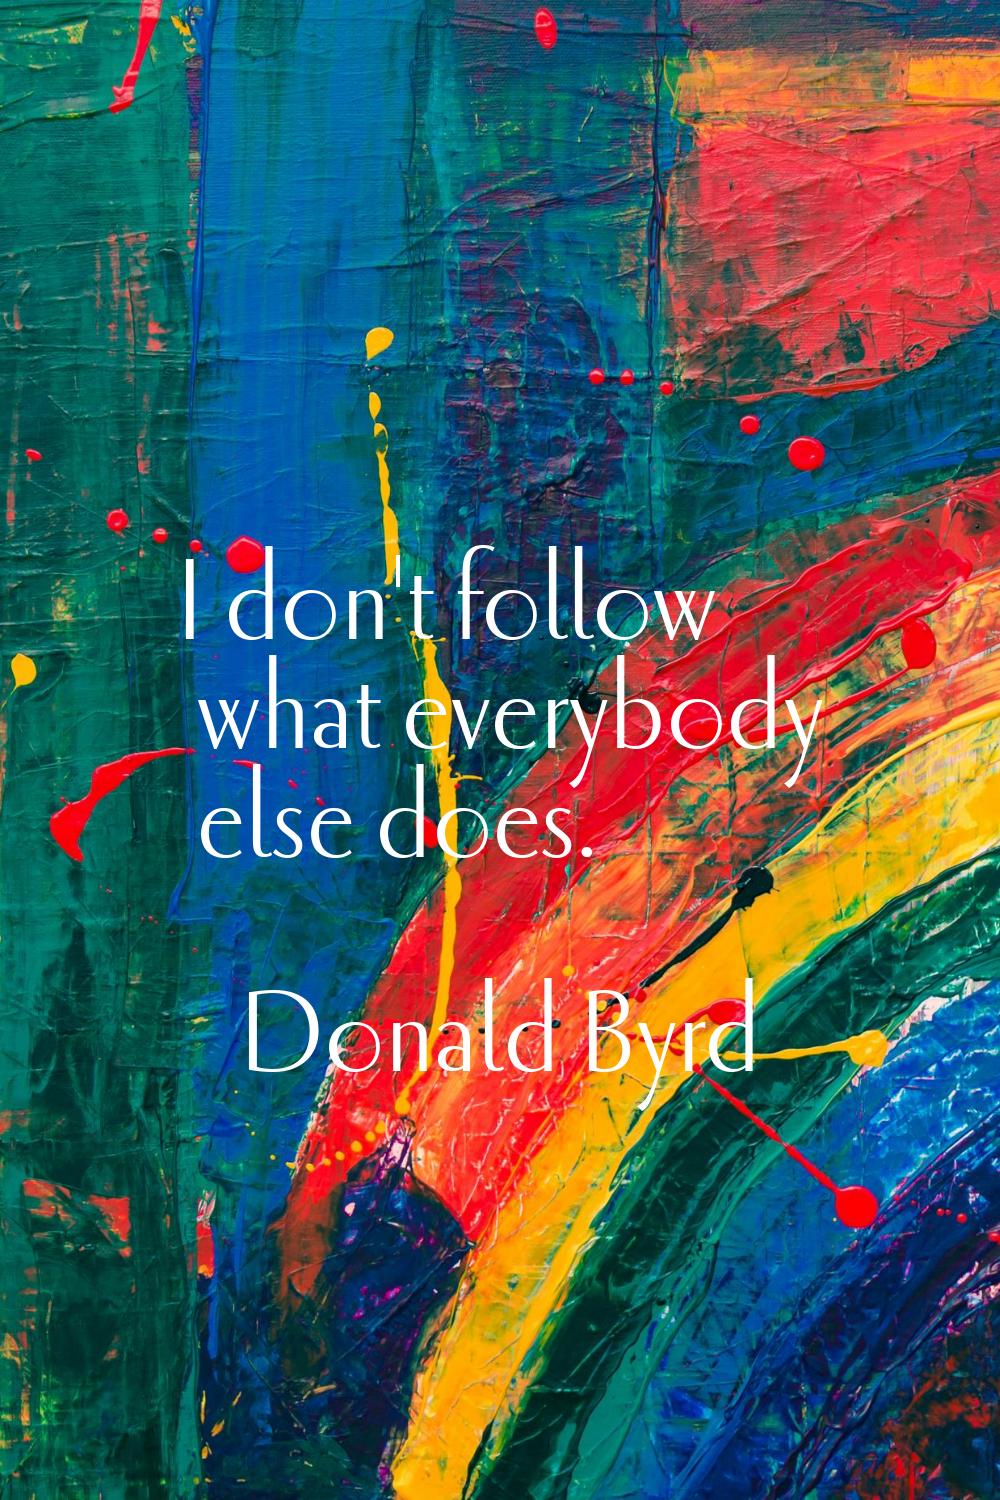 I don't follow what everybody else does.